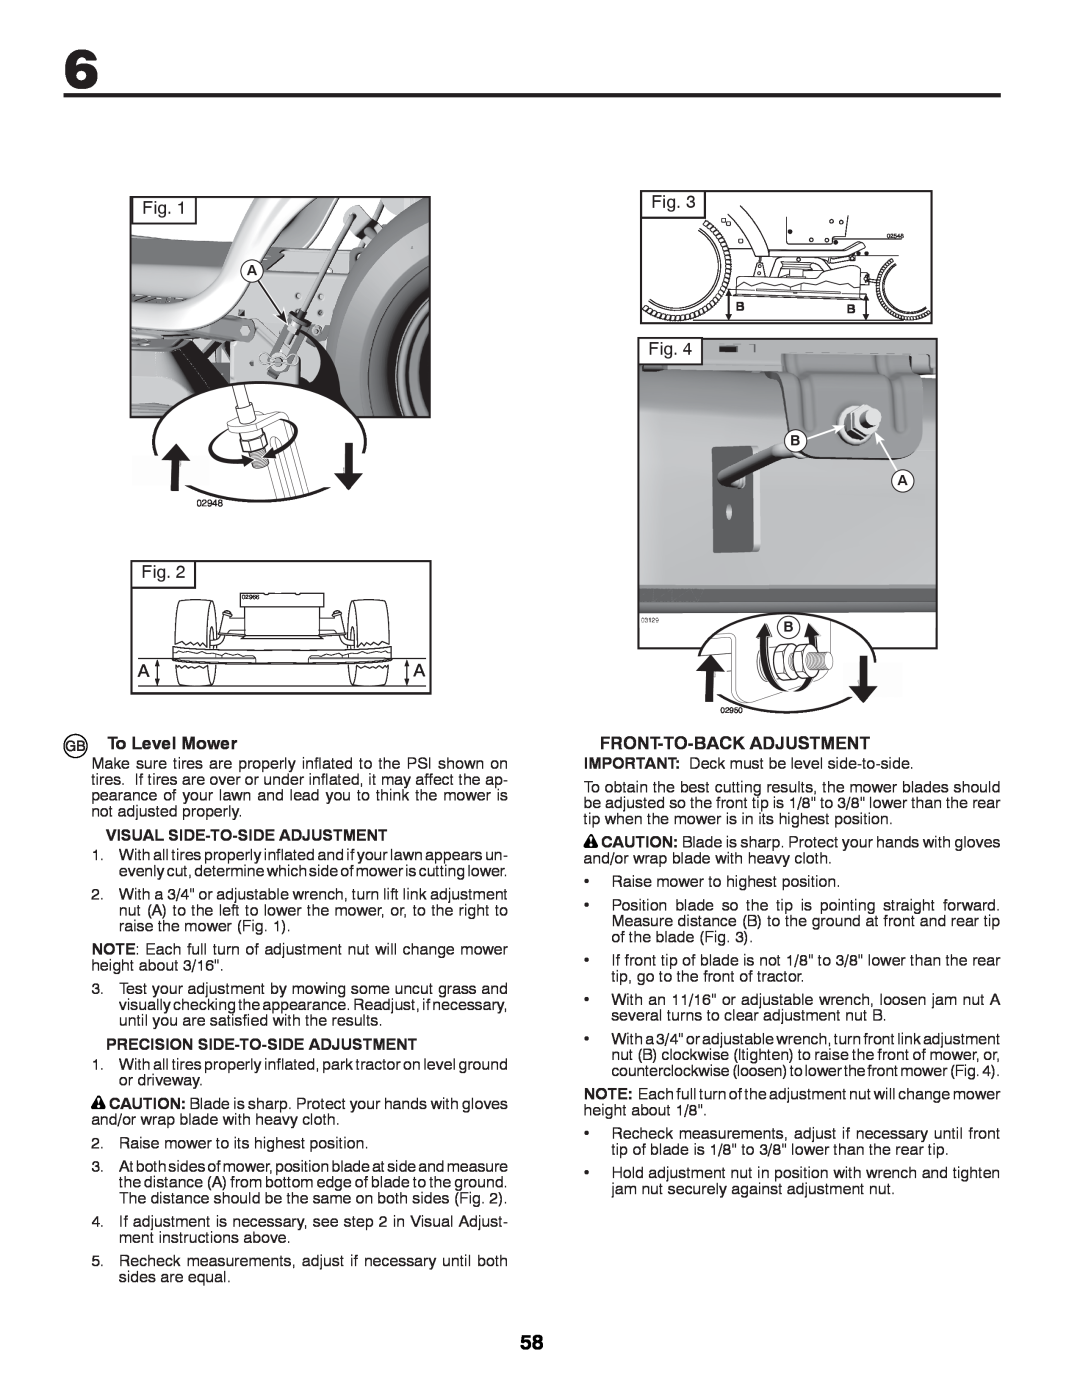 Partner Tech P11577 instruction manual To Level Mower, Front-To-Back Adjustment, Visual Side-To-Side Adjustment 